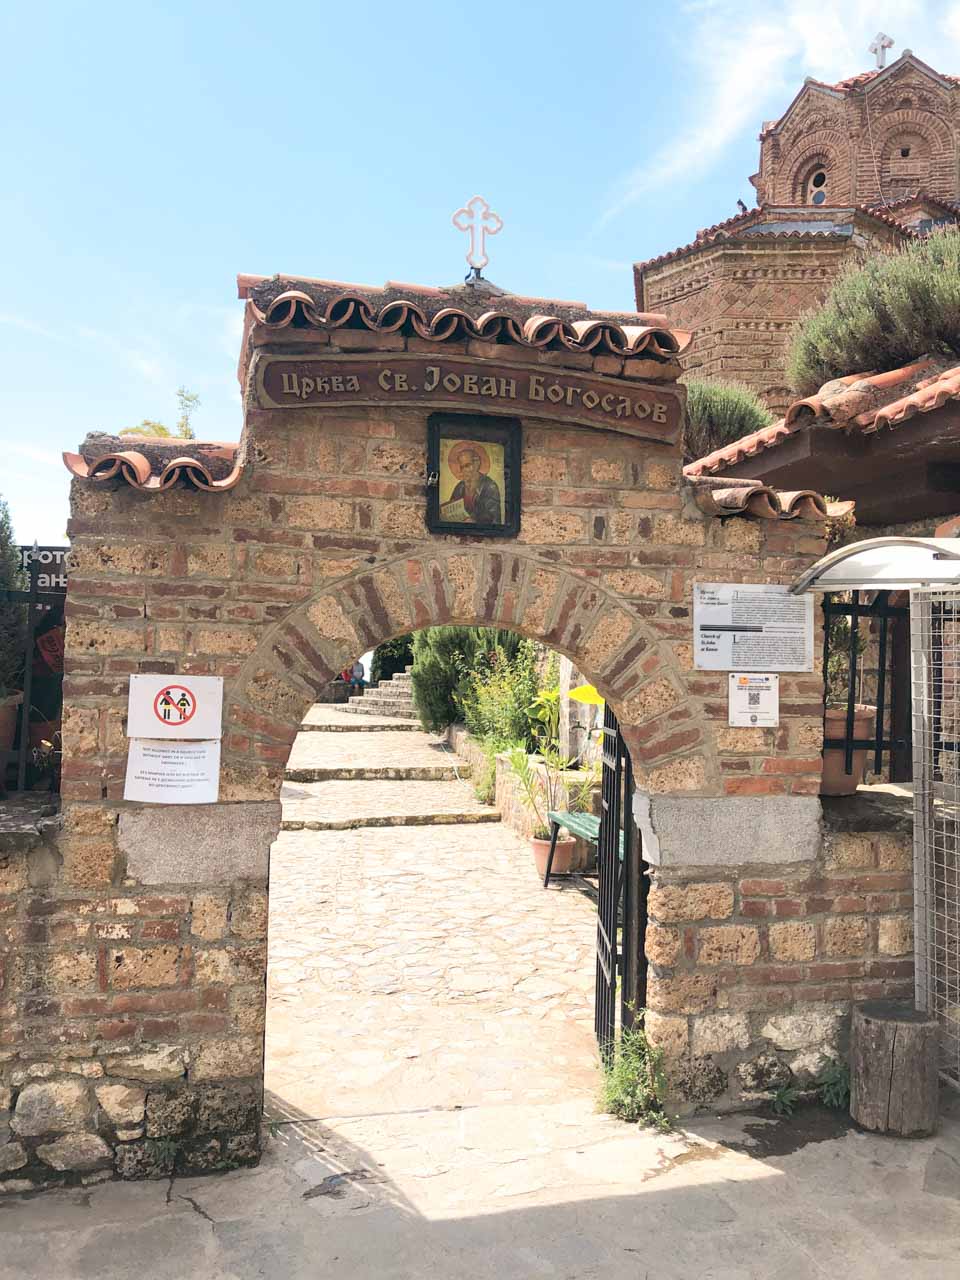 Entrance gate to the Church of St. John at Kaneo in Ohrid, North Macedonia